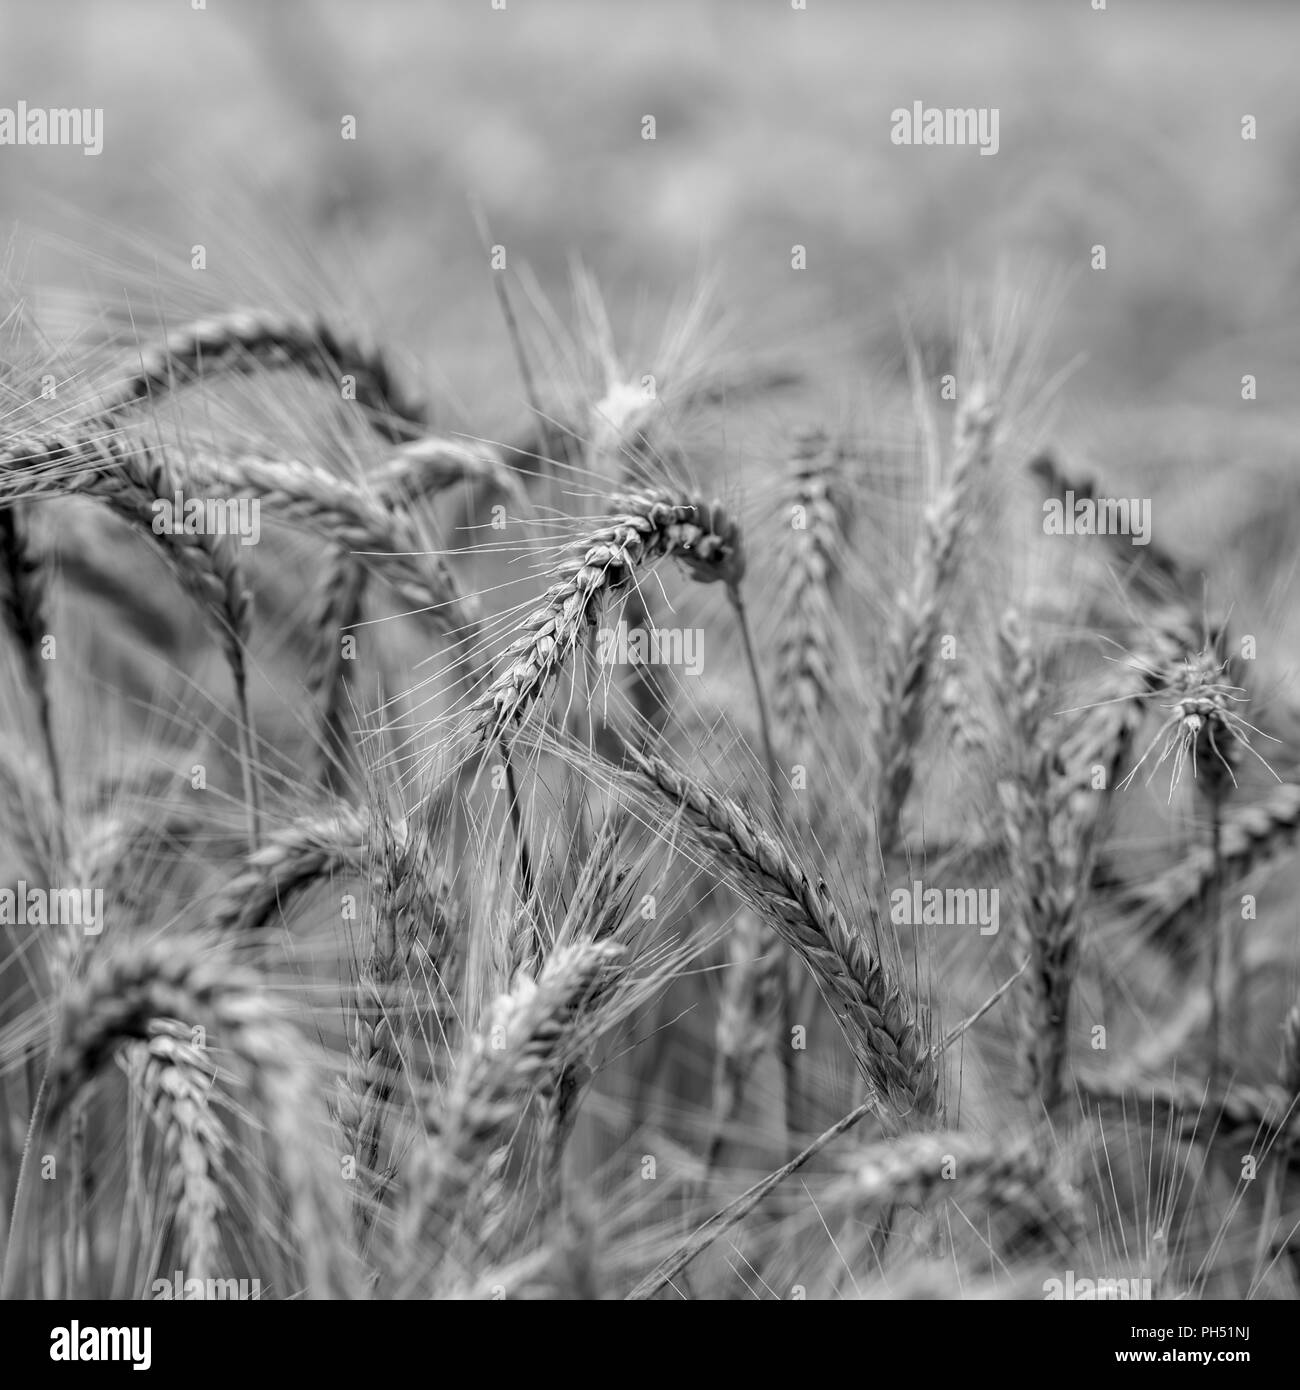 Greyscale agricultural background of ripening ears of wheat in a field in square format. Stock Photo